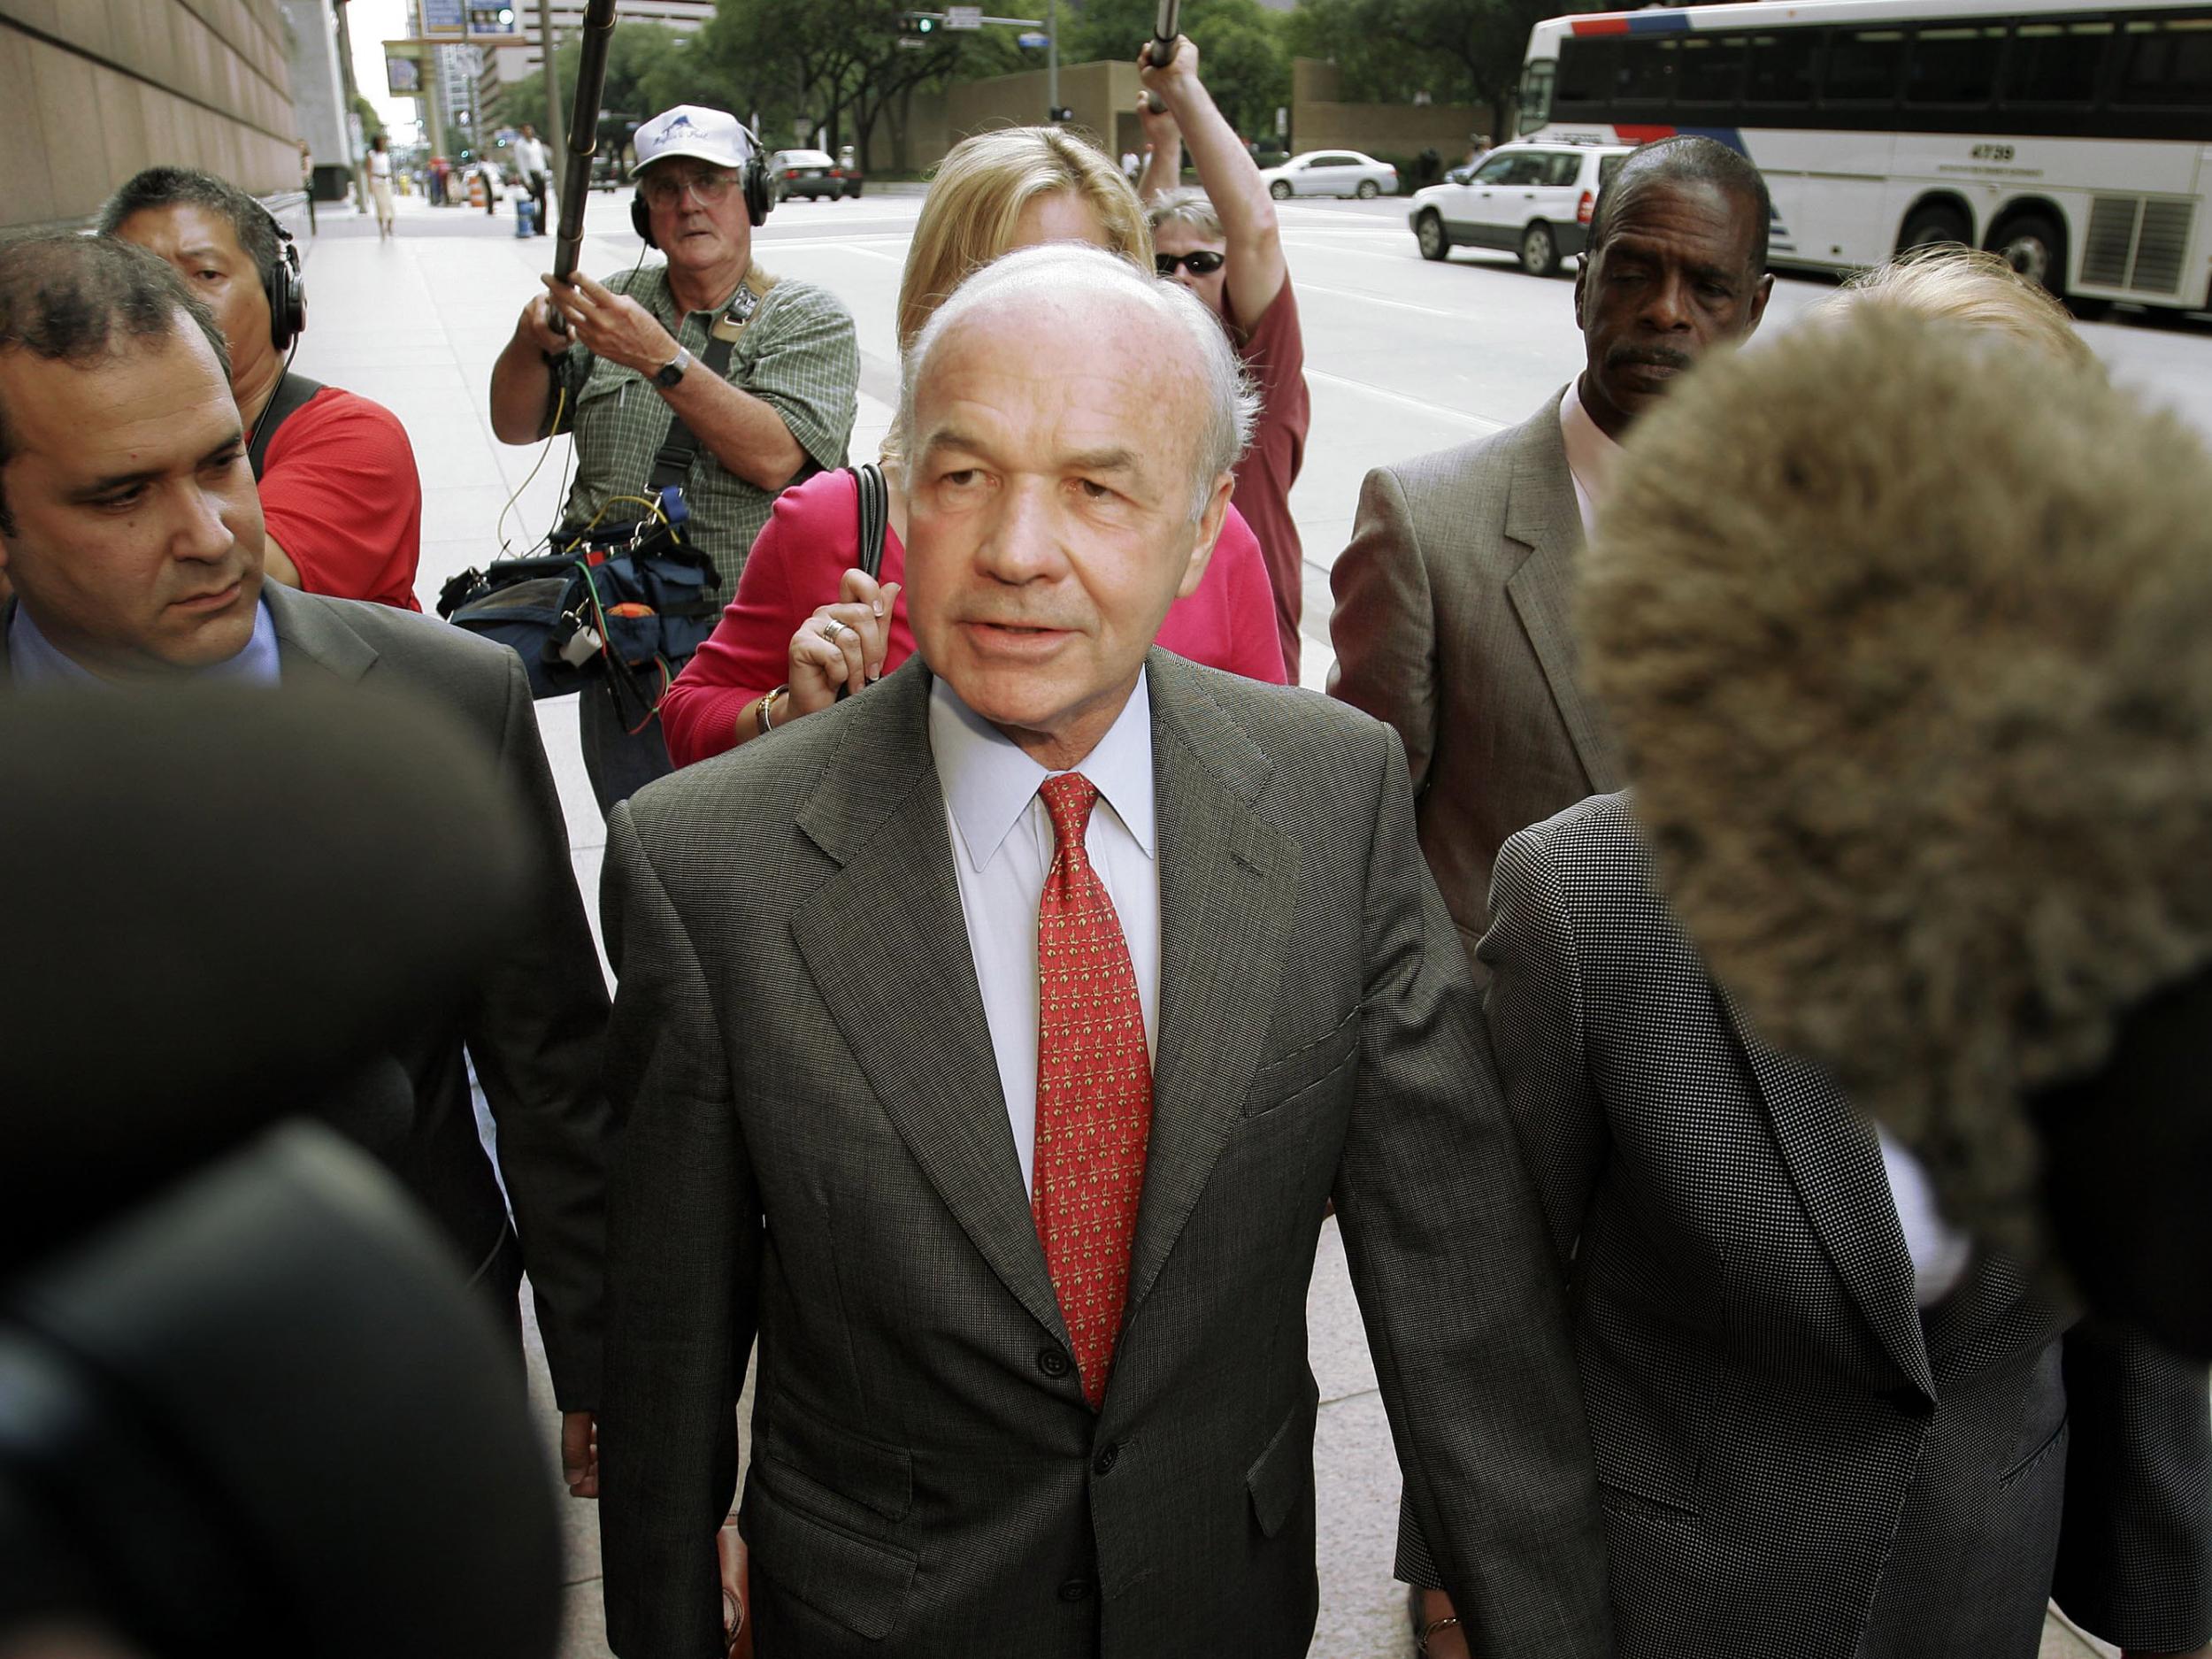 Enron CEO Kenneth Lay was a keen philanthropist – but also presided over accountancy fraud at the company eventually leading to its collapse